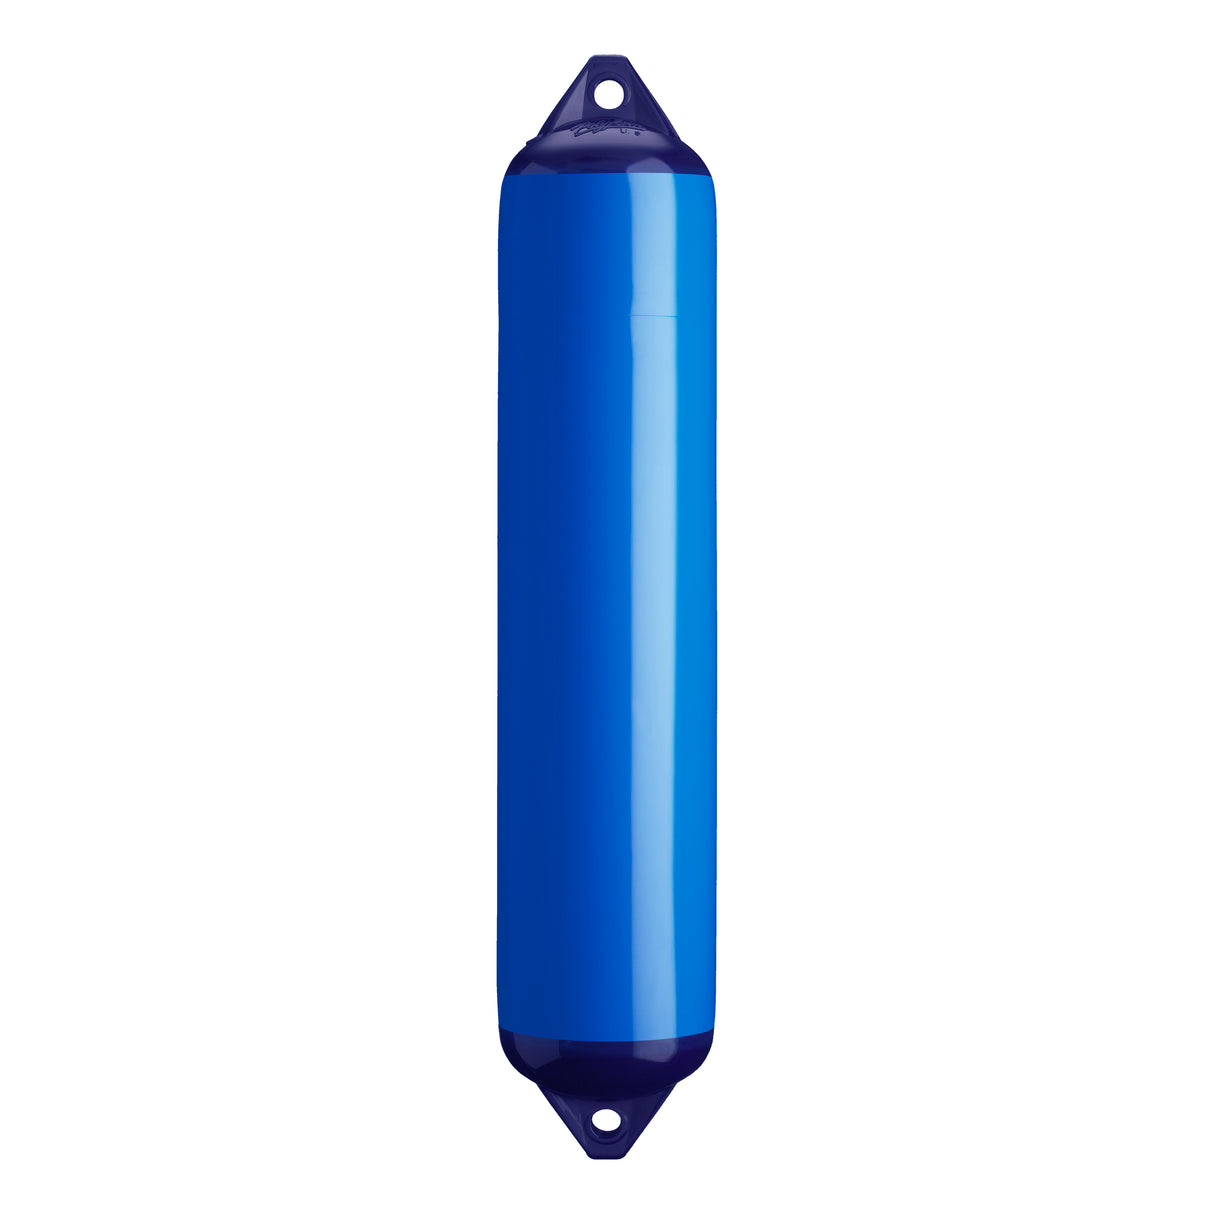 Blue boat fender with Navy-Top, Polyform F-4 